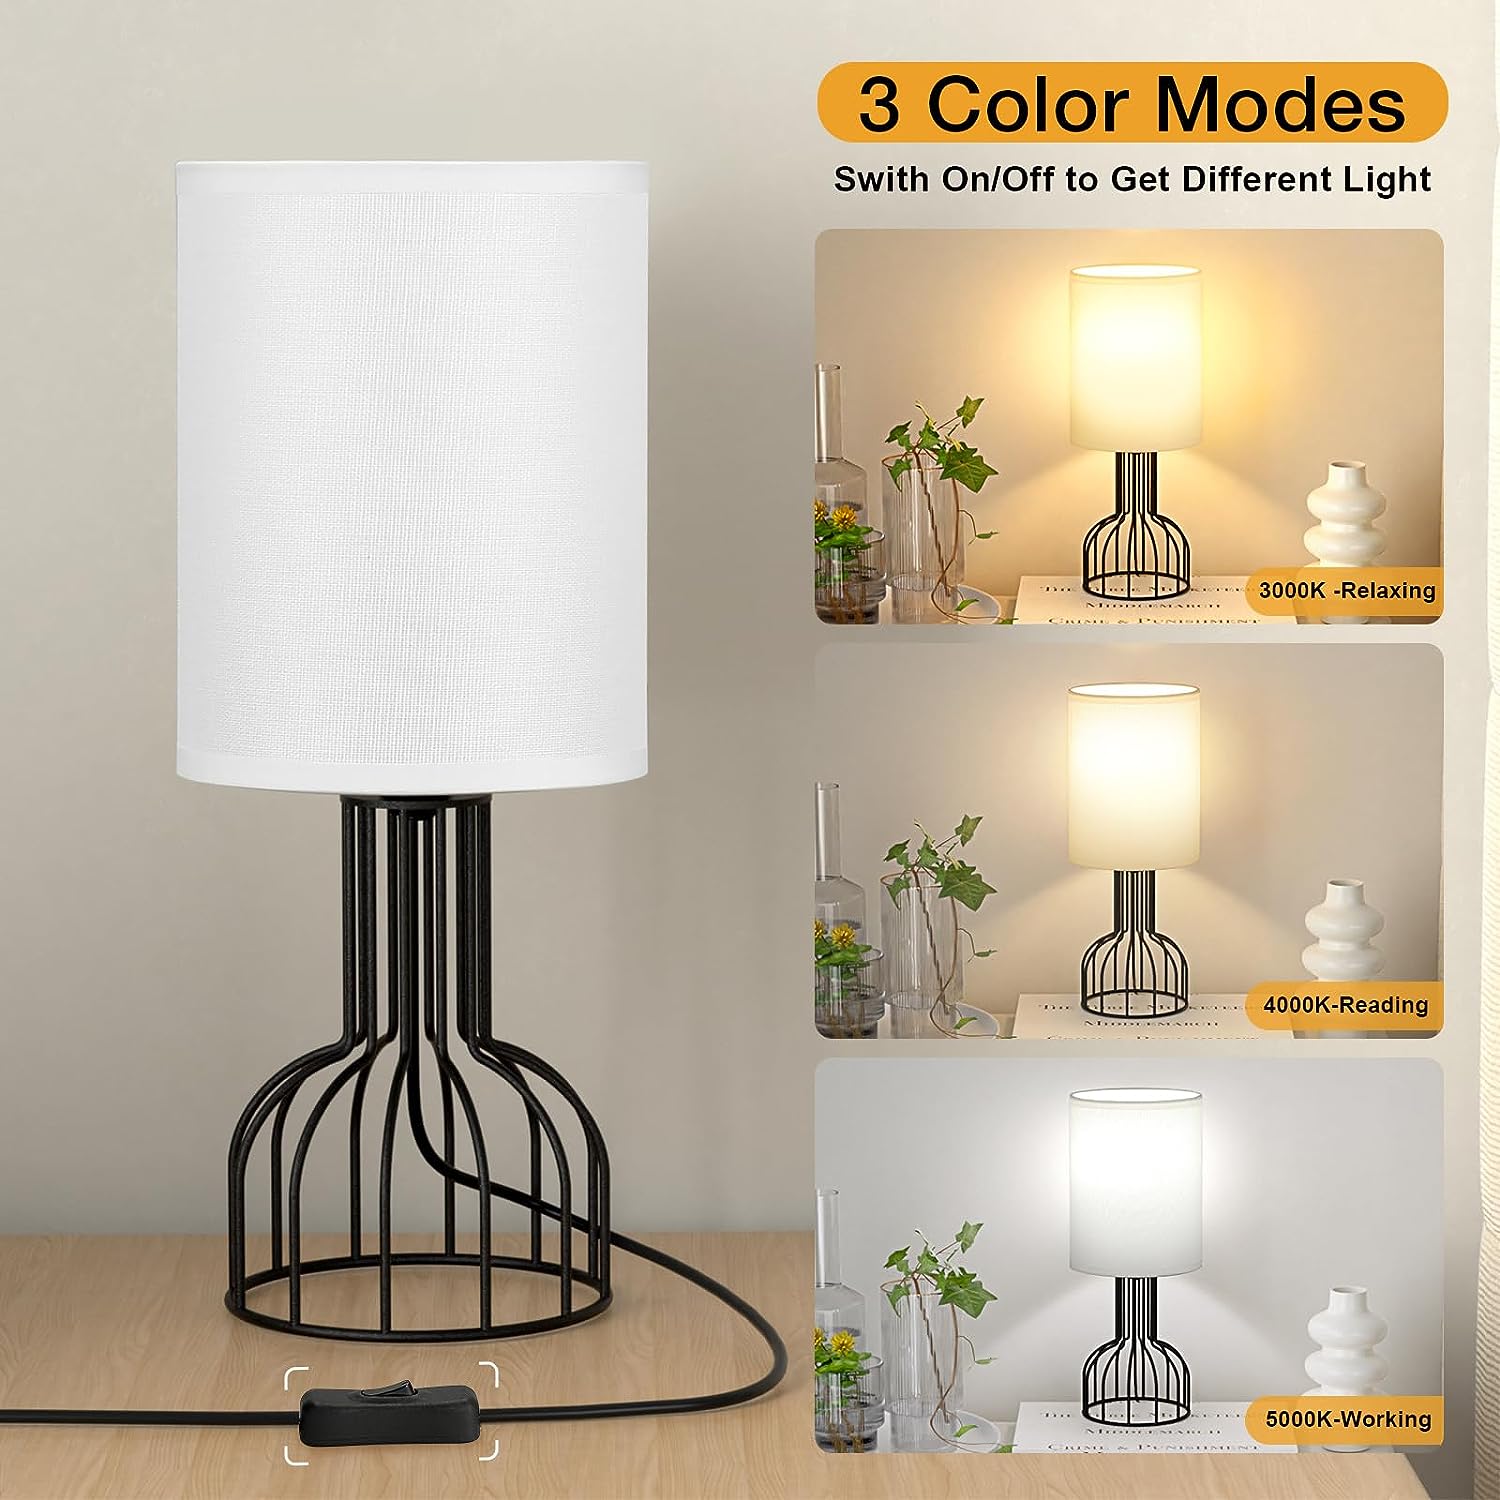 VENETIO Beside Table Lamp for Bedroom - Small Lamp with 3 Color Modes-3000K-4000K-5000K Nightstand Lamp with Simple Black Metal Base and White Fabric Shade for Kids, Living Room，Bedroom (LED Bulb Included) ➡ B-00008